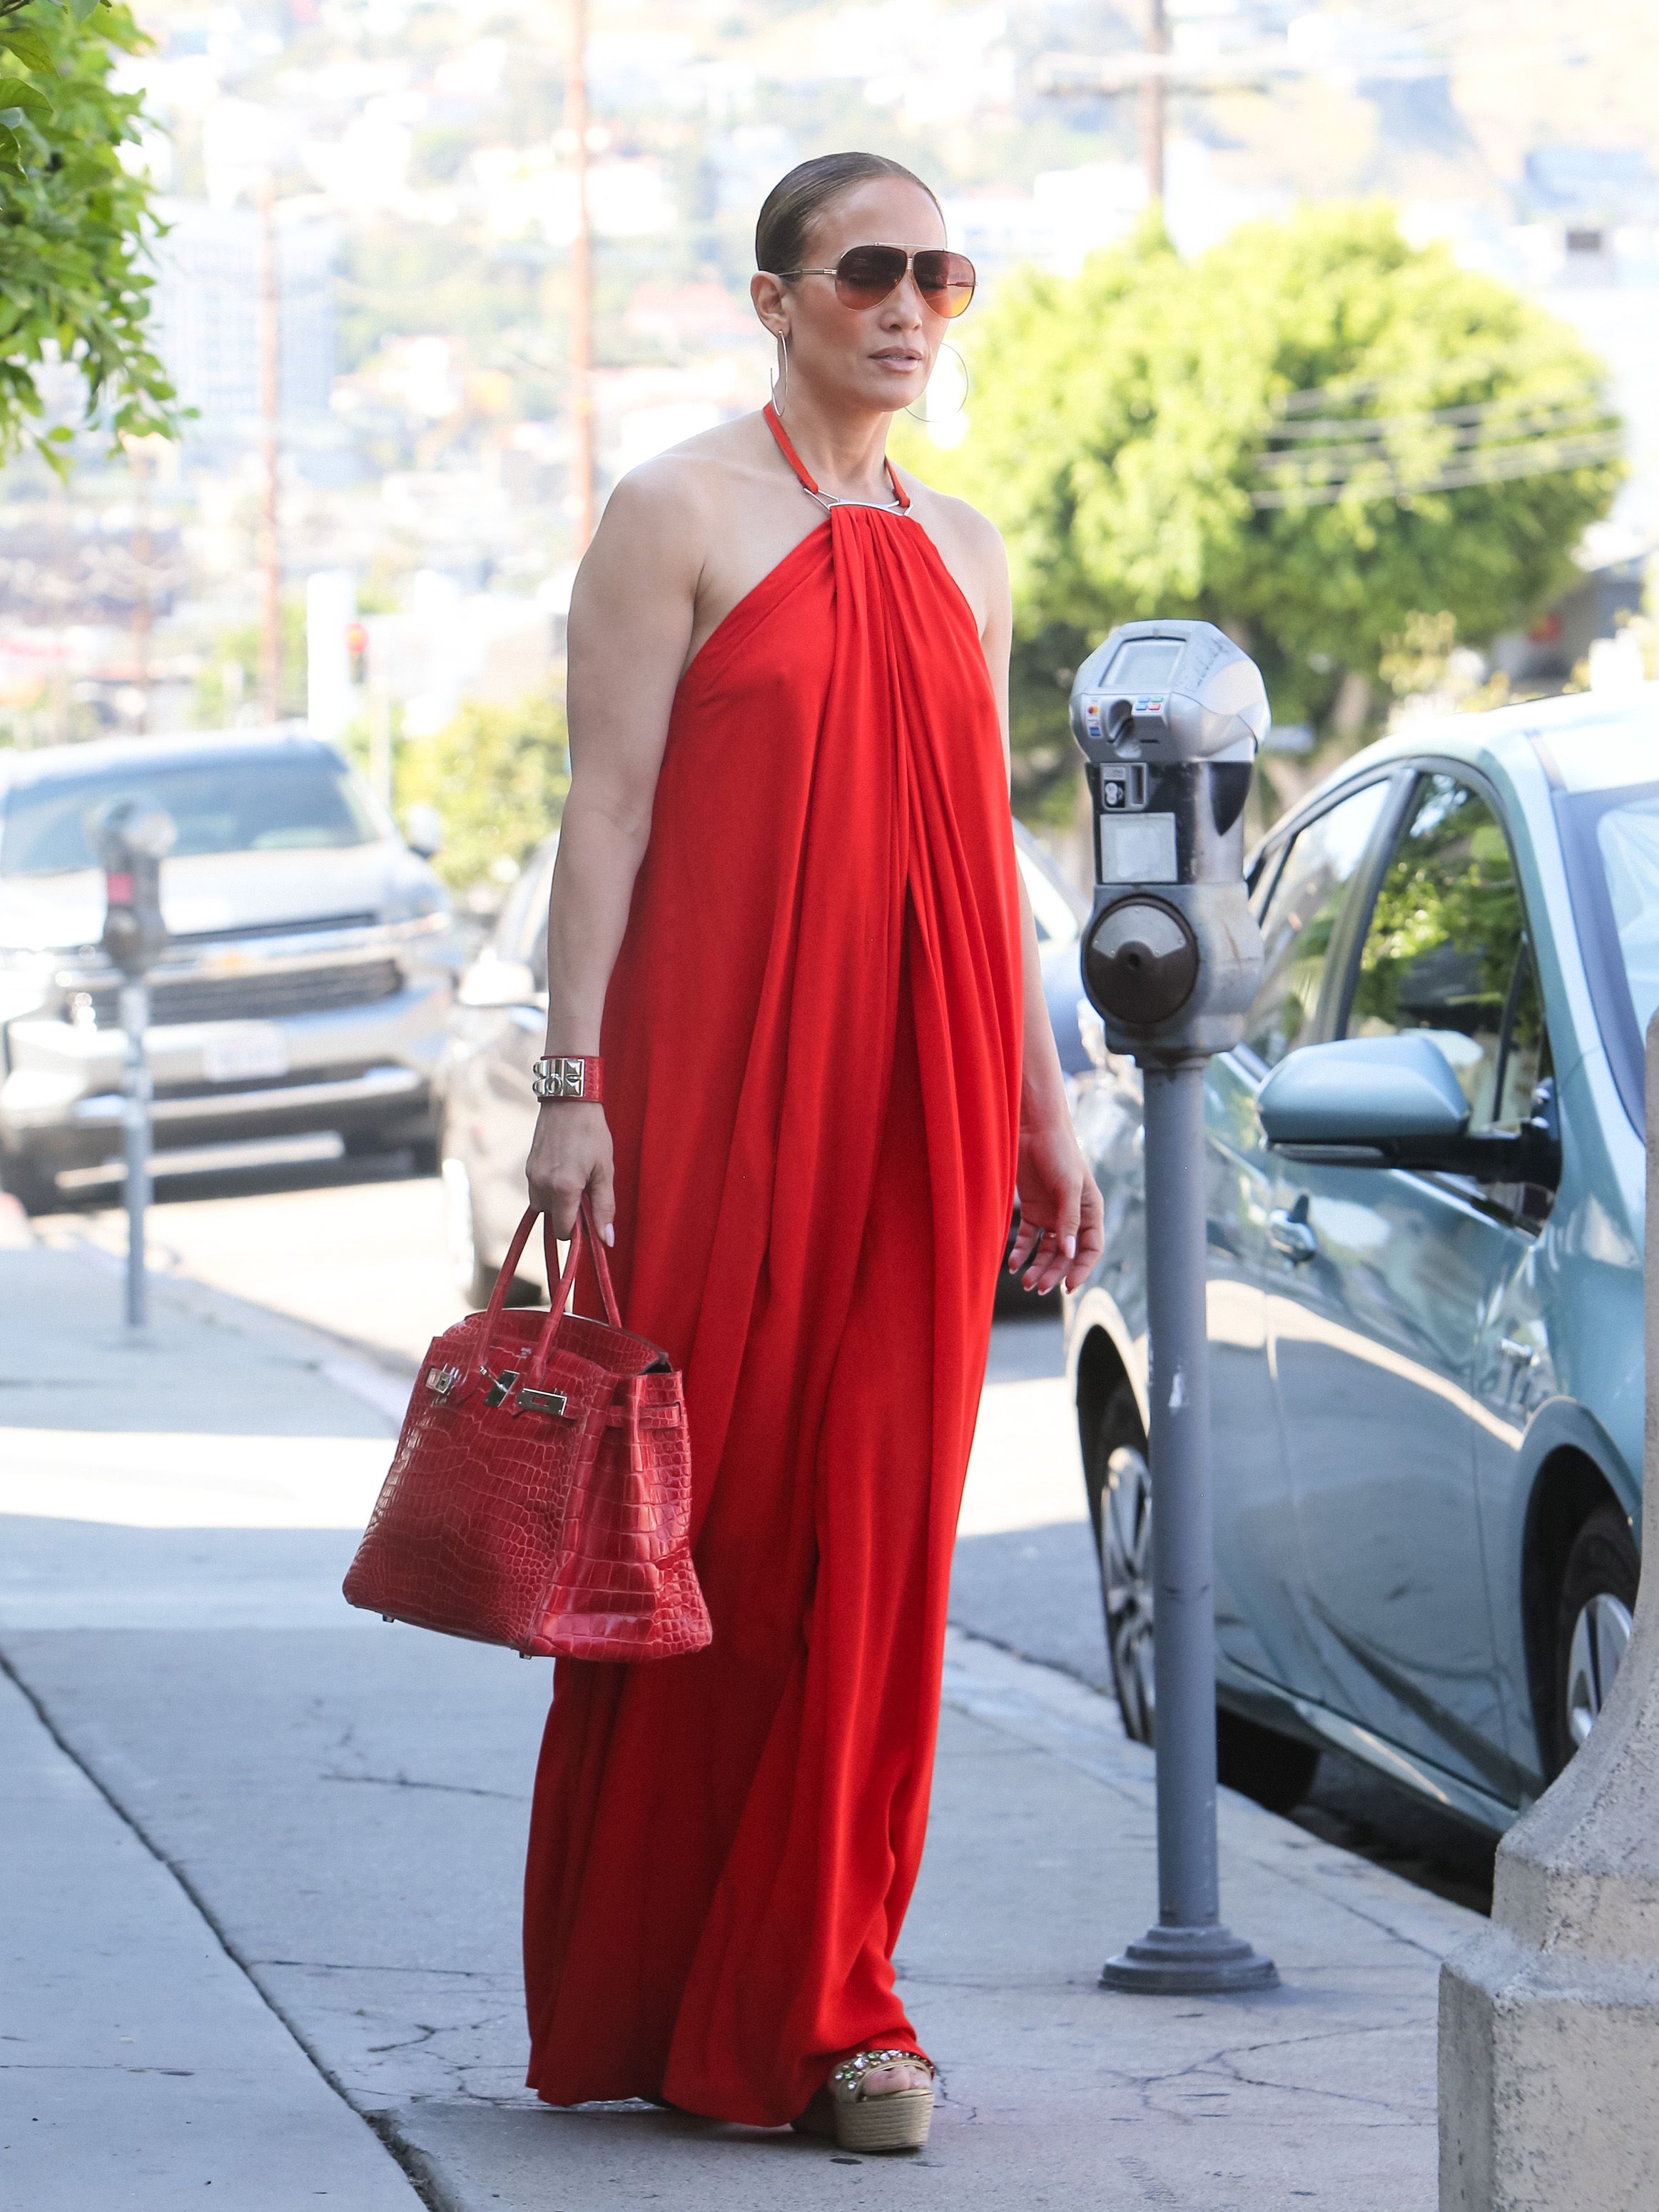 Shop the look: Kendall Jenner's red Birkin bag and Taylor Swift's